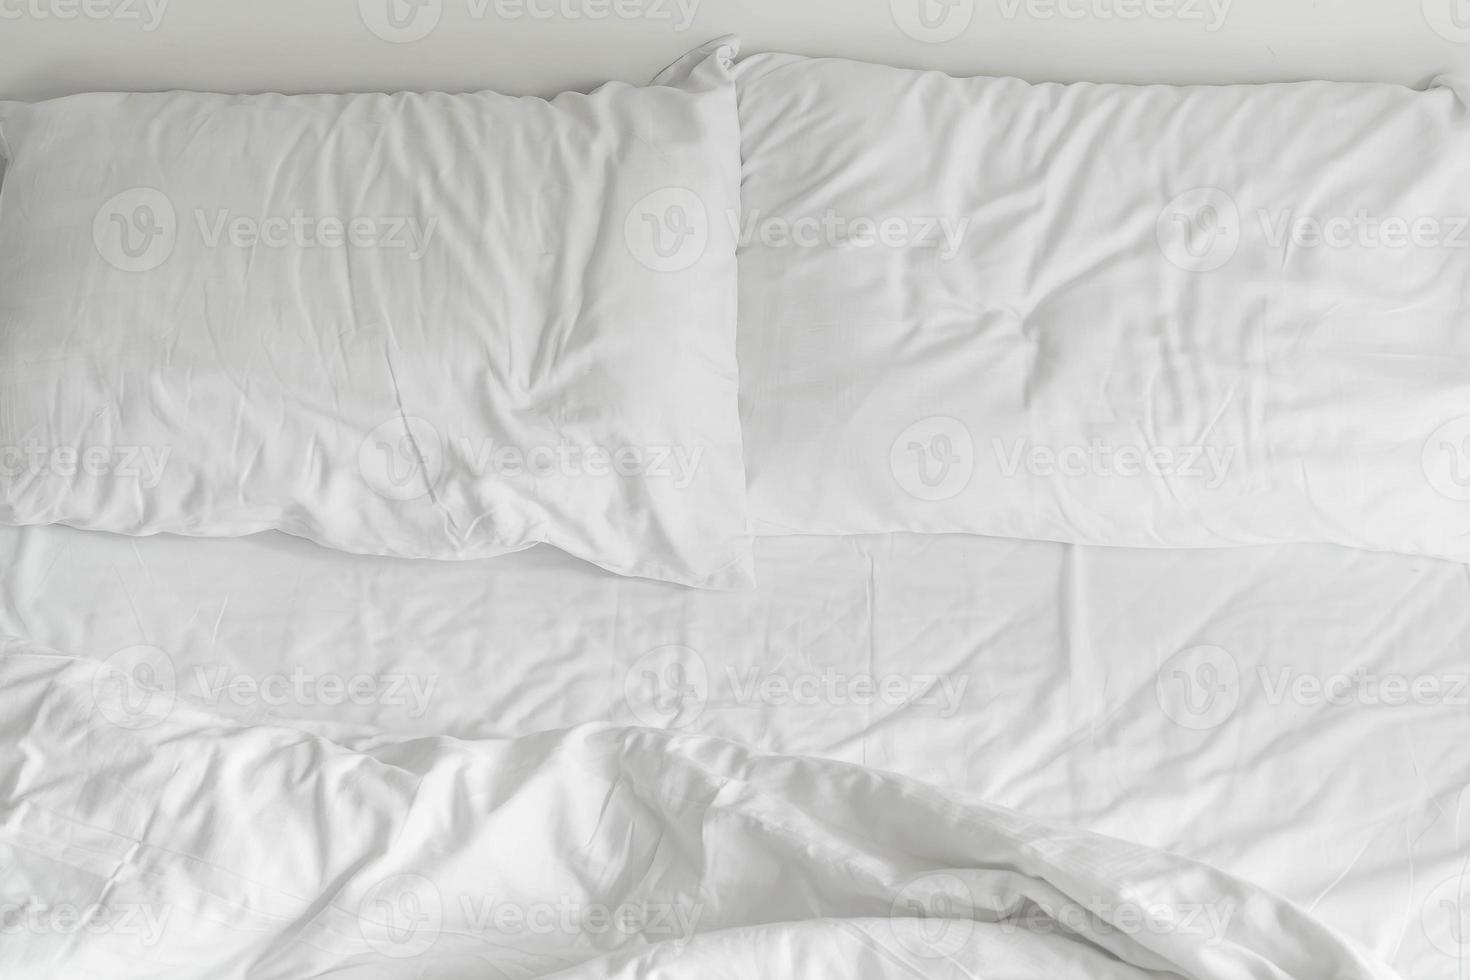 Rimpled bed with white messy pillow decoration in bedroom interior photo